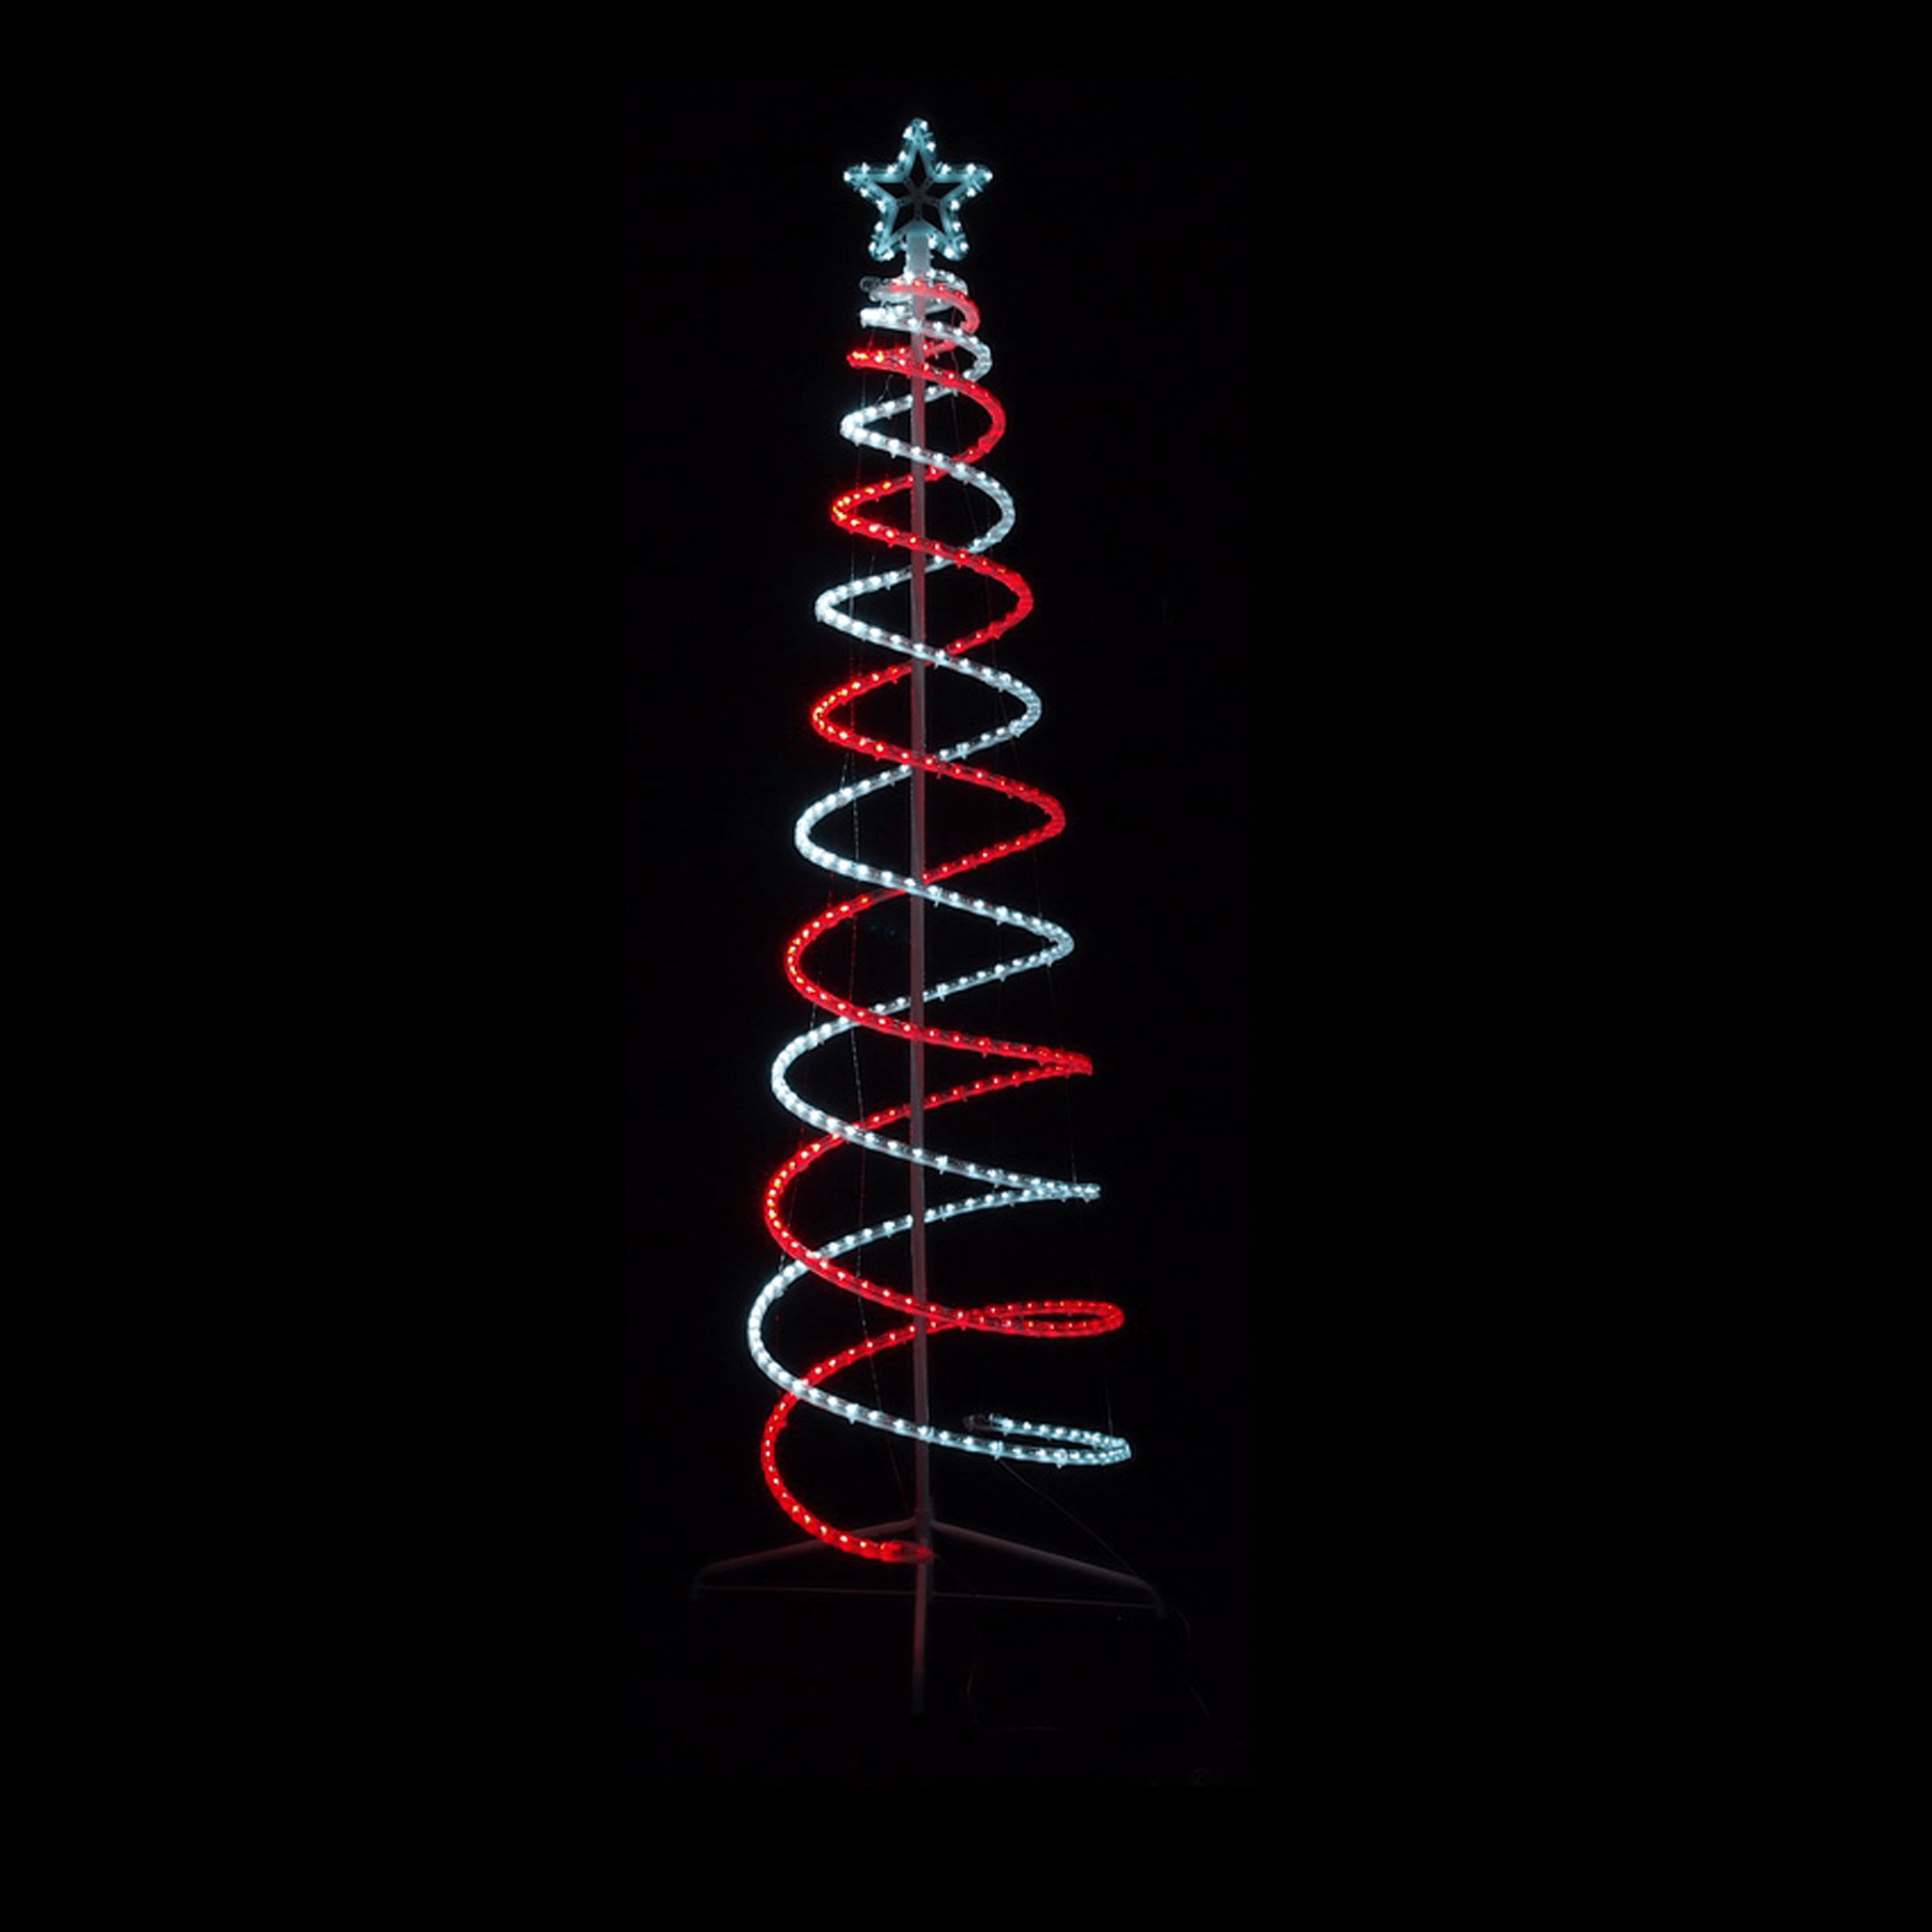 Lexi Lighting Christmas Tree White + Red 2.1M LED Double Spiral Tree - 4 Colour Options LLOUT01WR-P